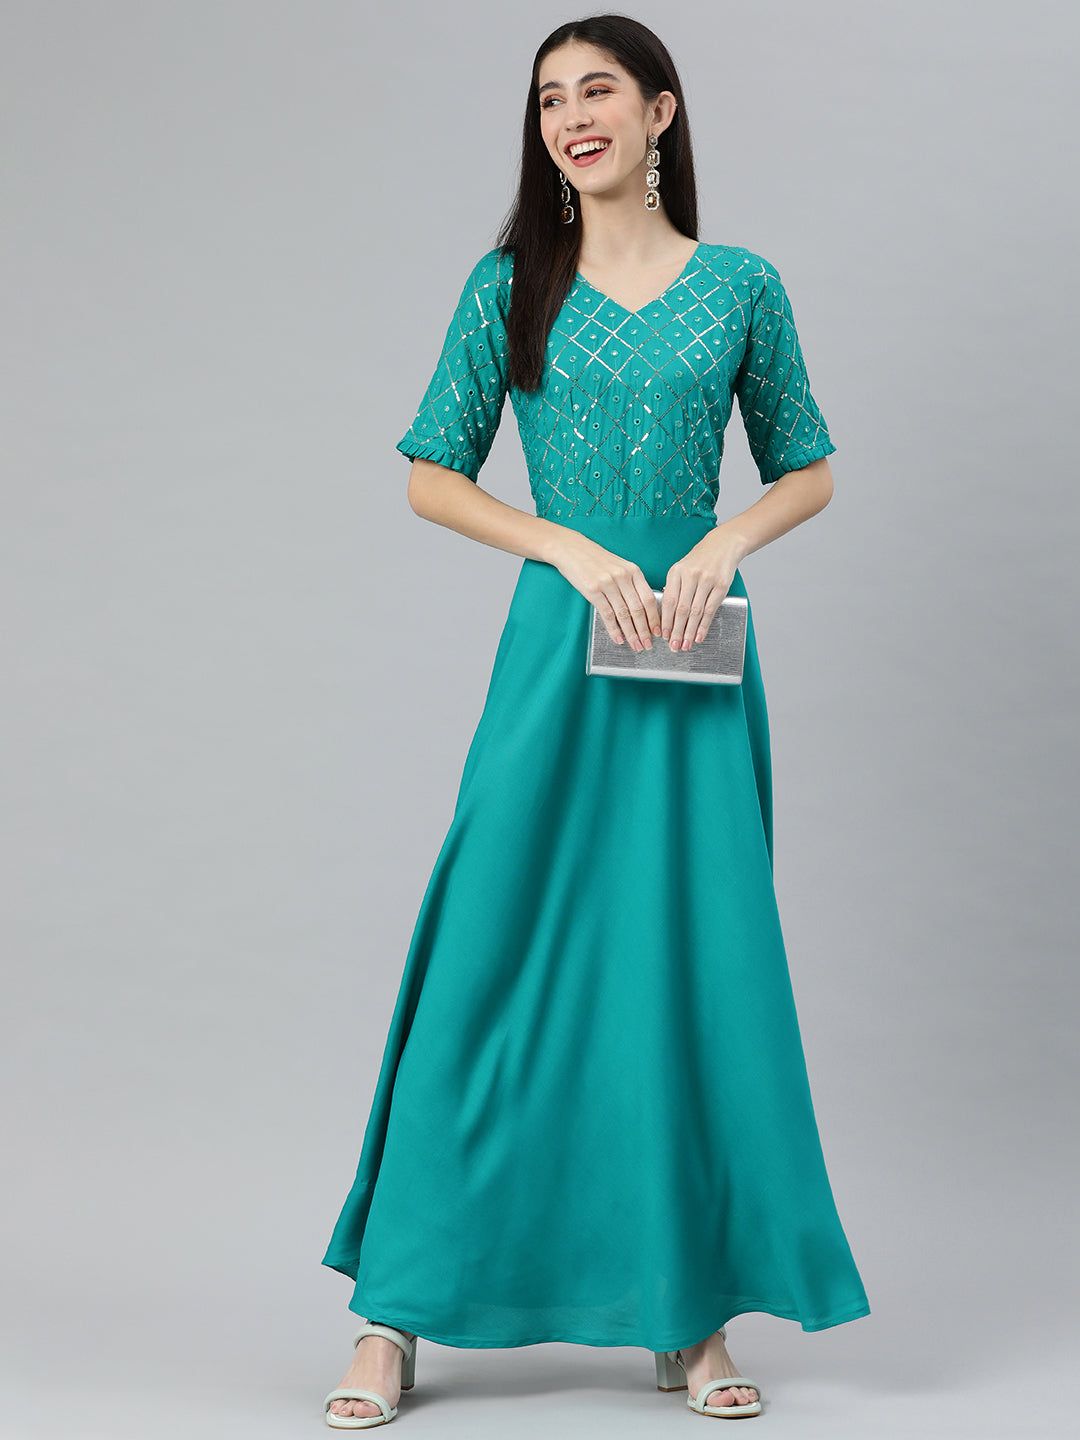 44 ~TURQUOISE-GREEN~ ideas | gorgeous dresses, gorgeous gowns, evening gowns